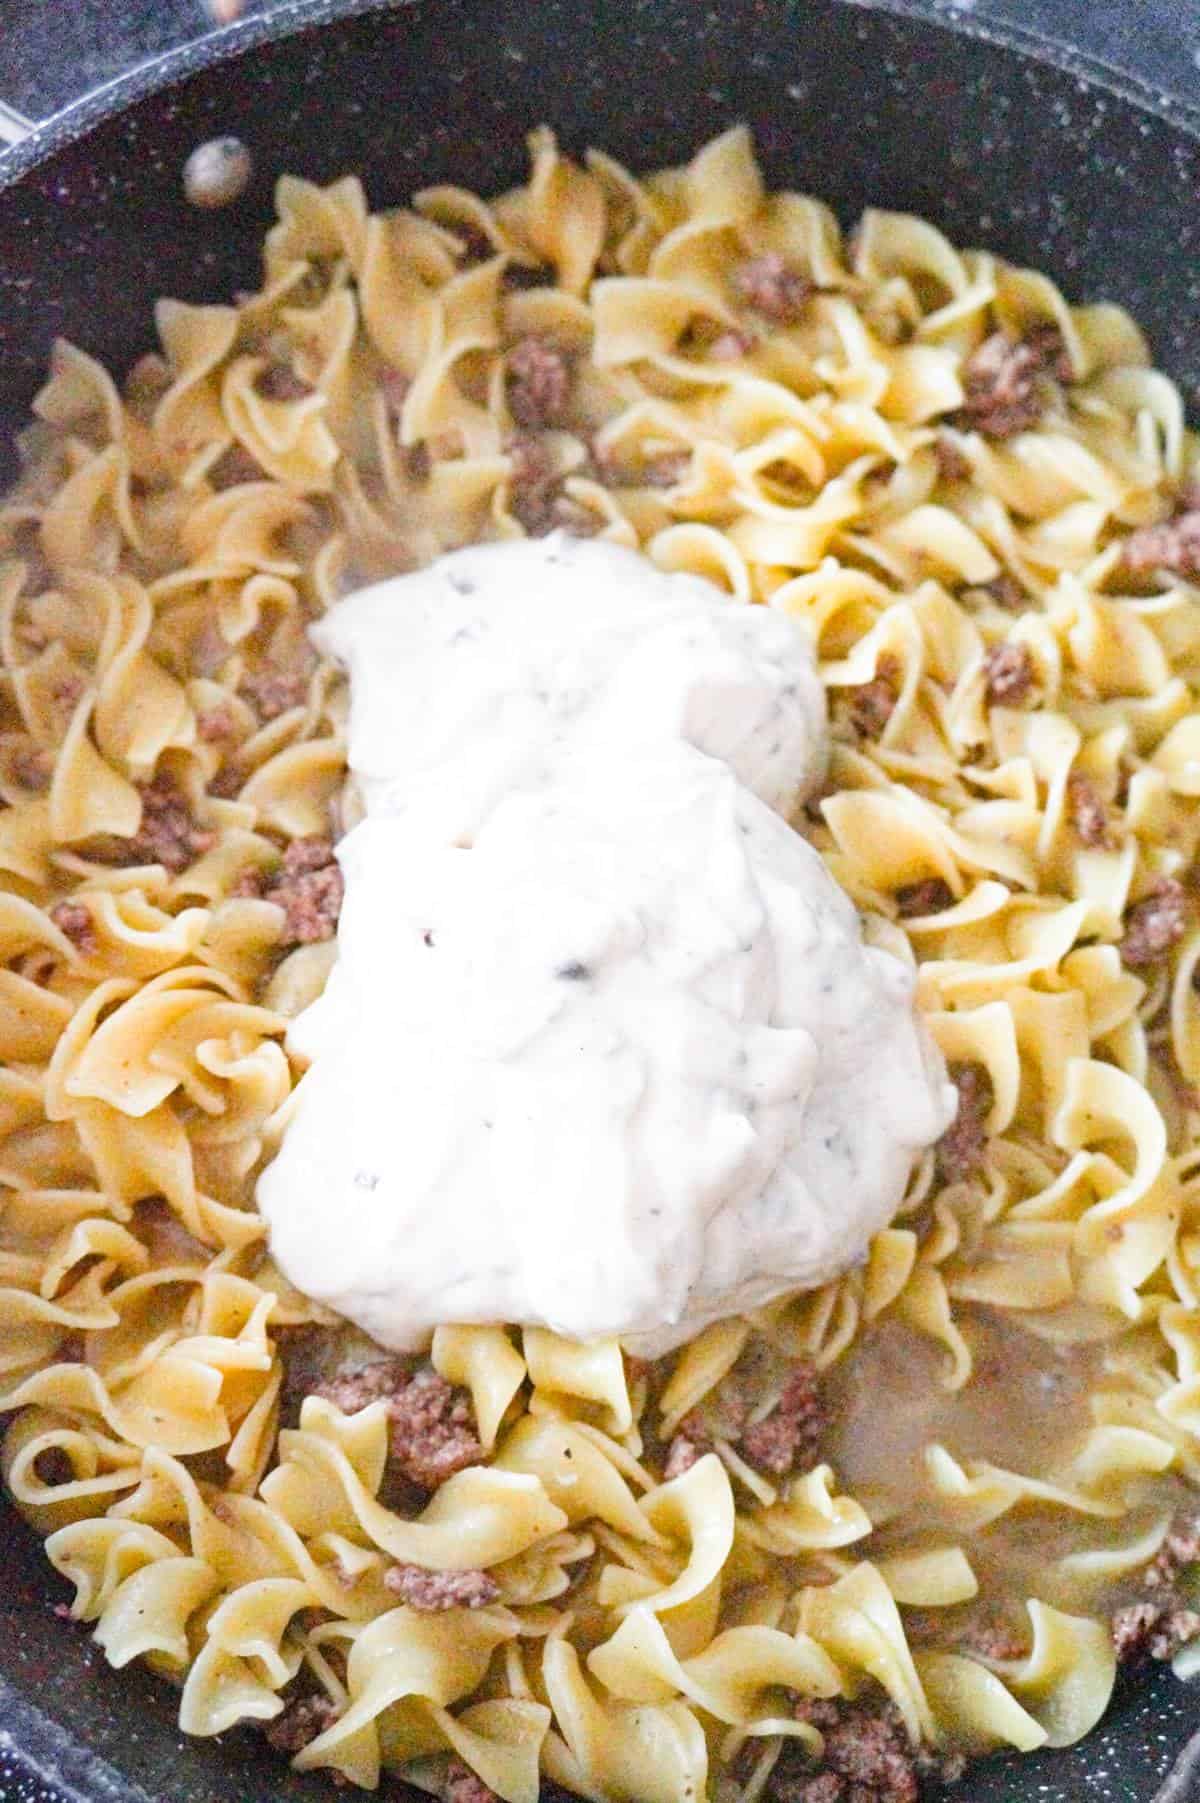 condensed cream of mushroom soup on top of cooked egg noodles and ground beef in a pan